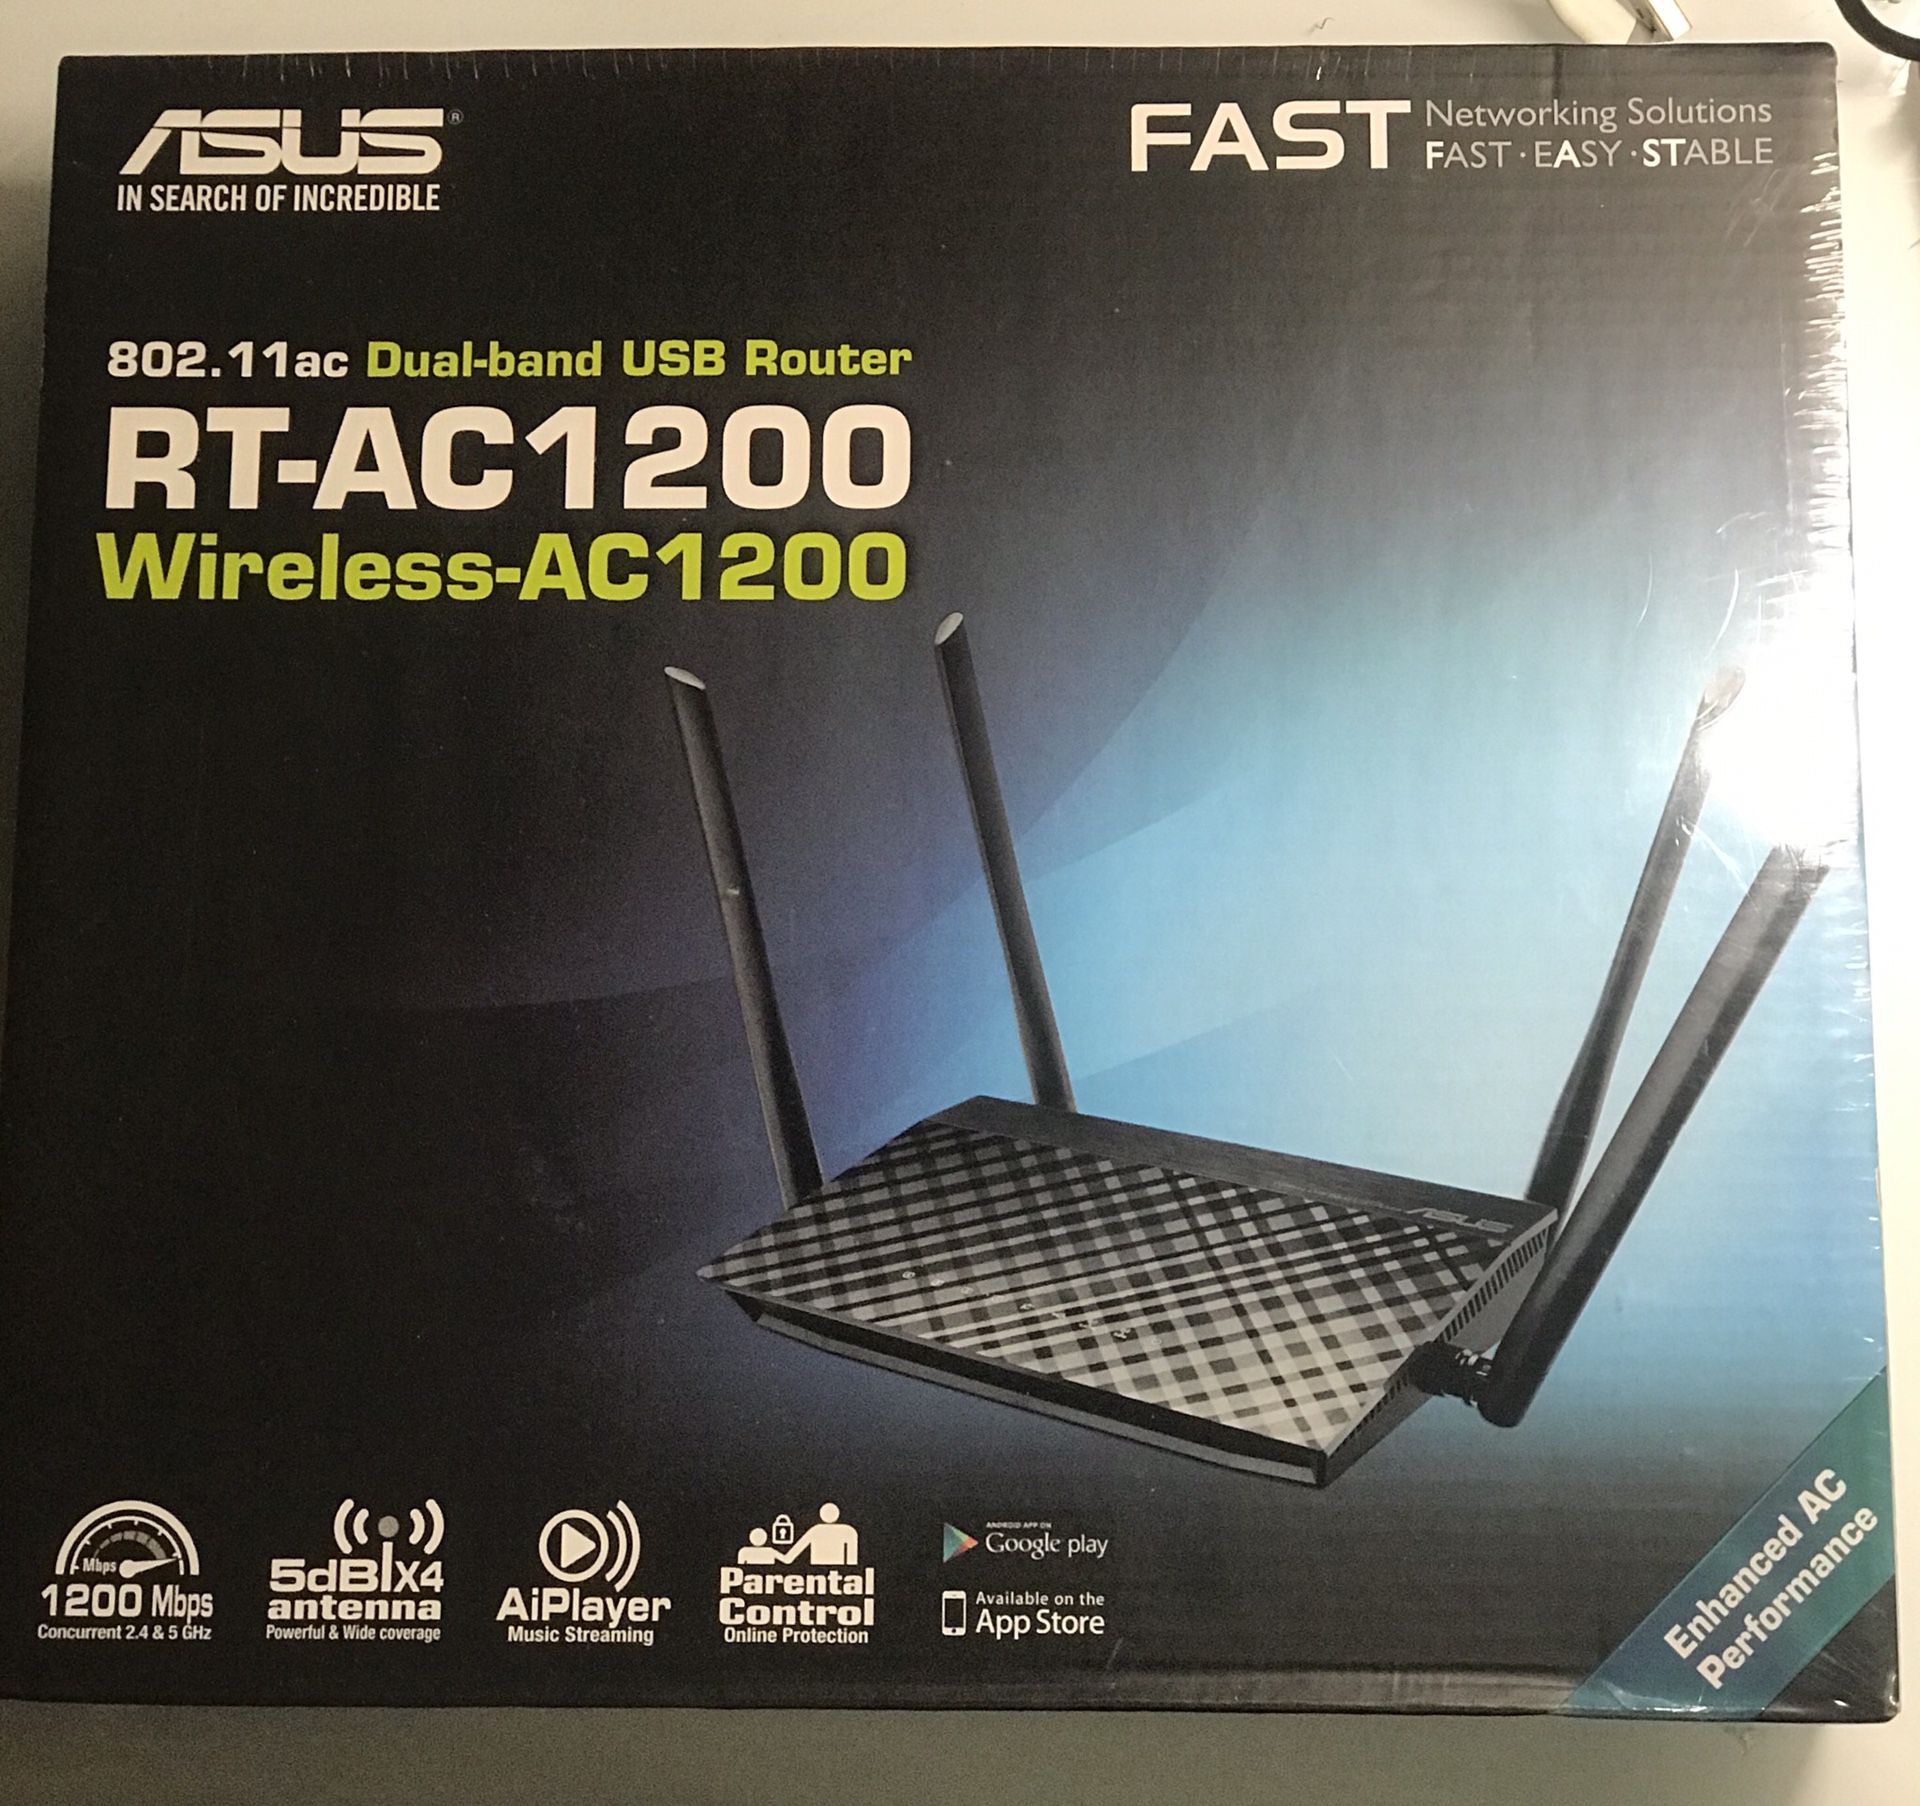 Asus RT-AC1200 Dual-band usb router